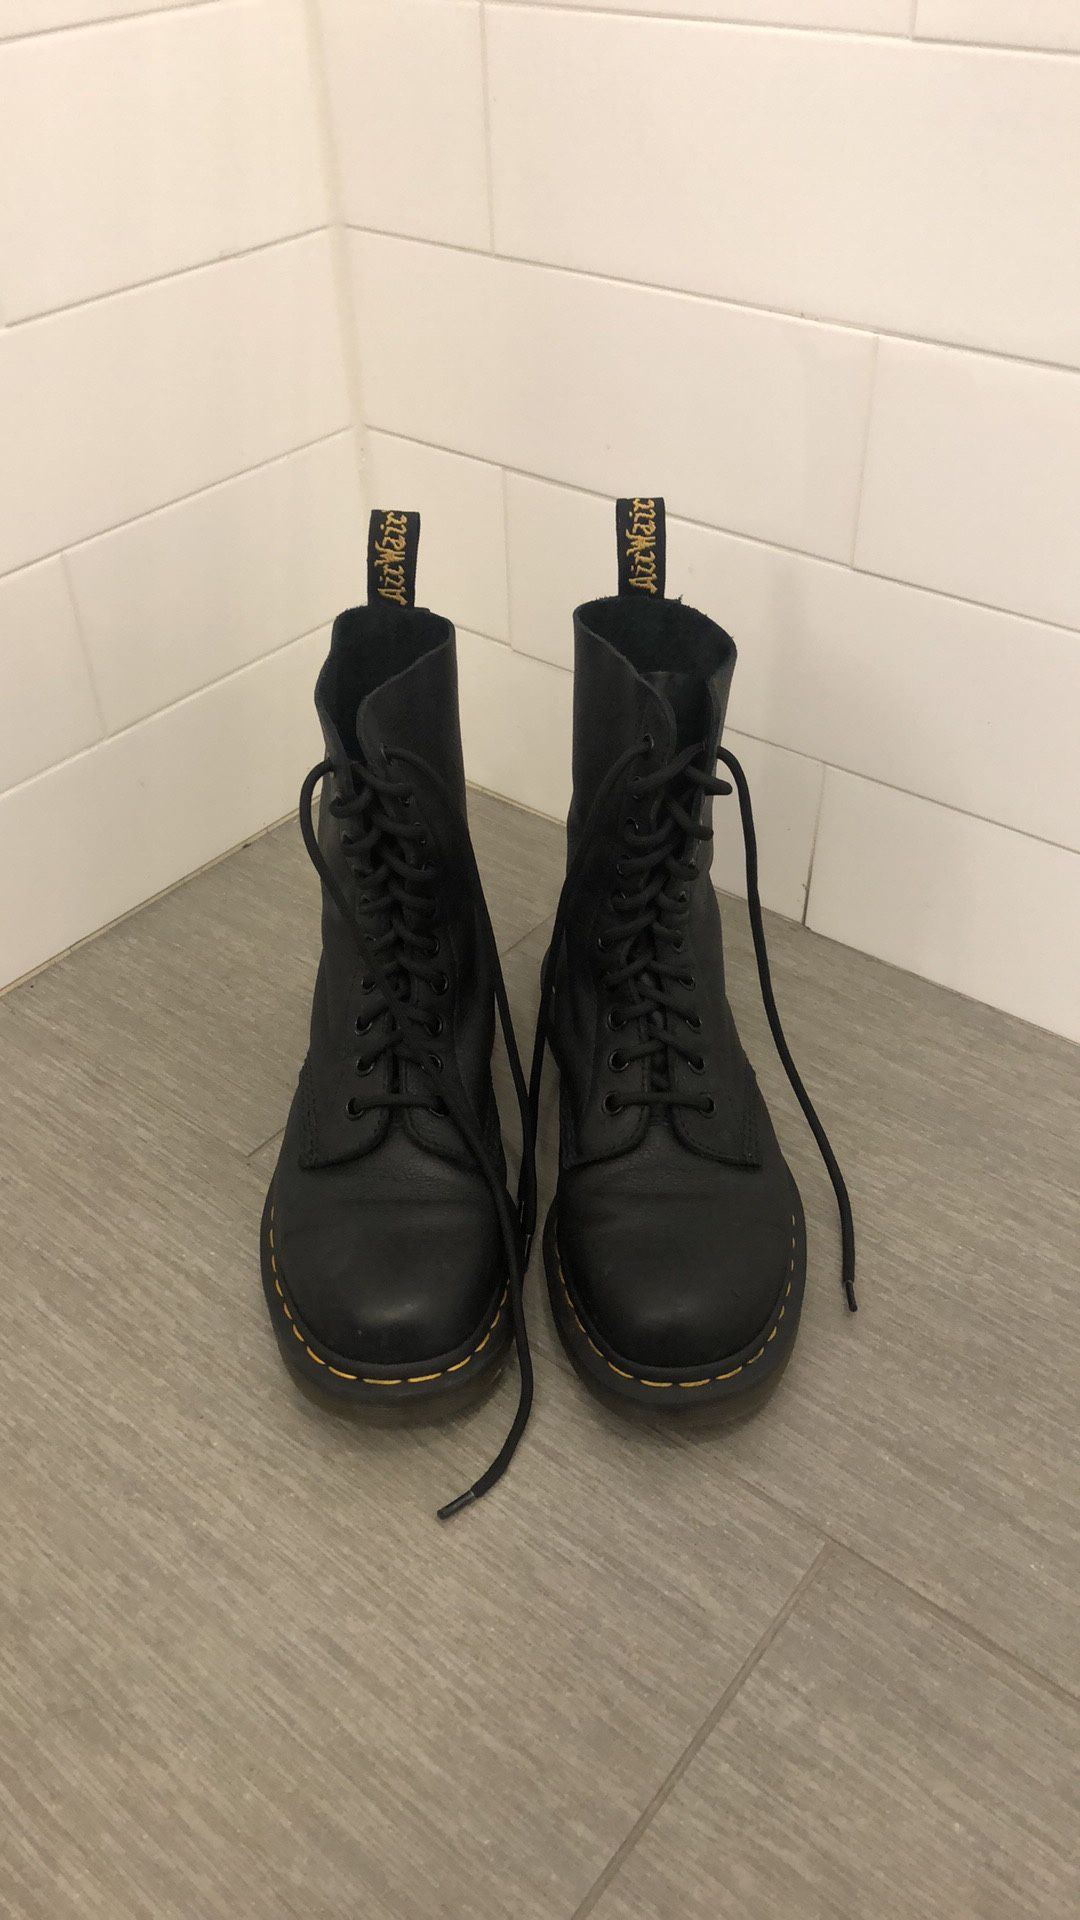 Dr.Martens soft lather mid high boots size 8.5/9